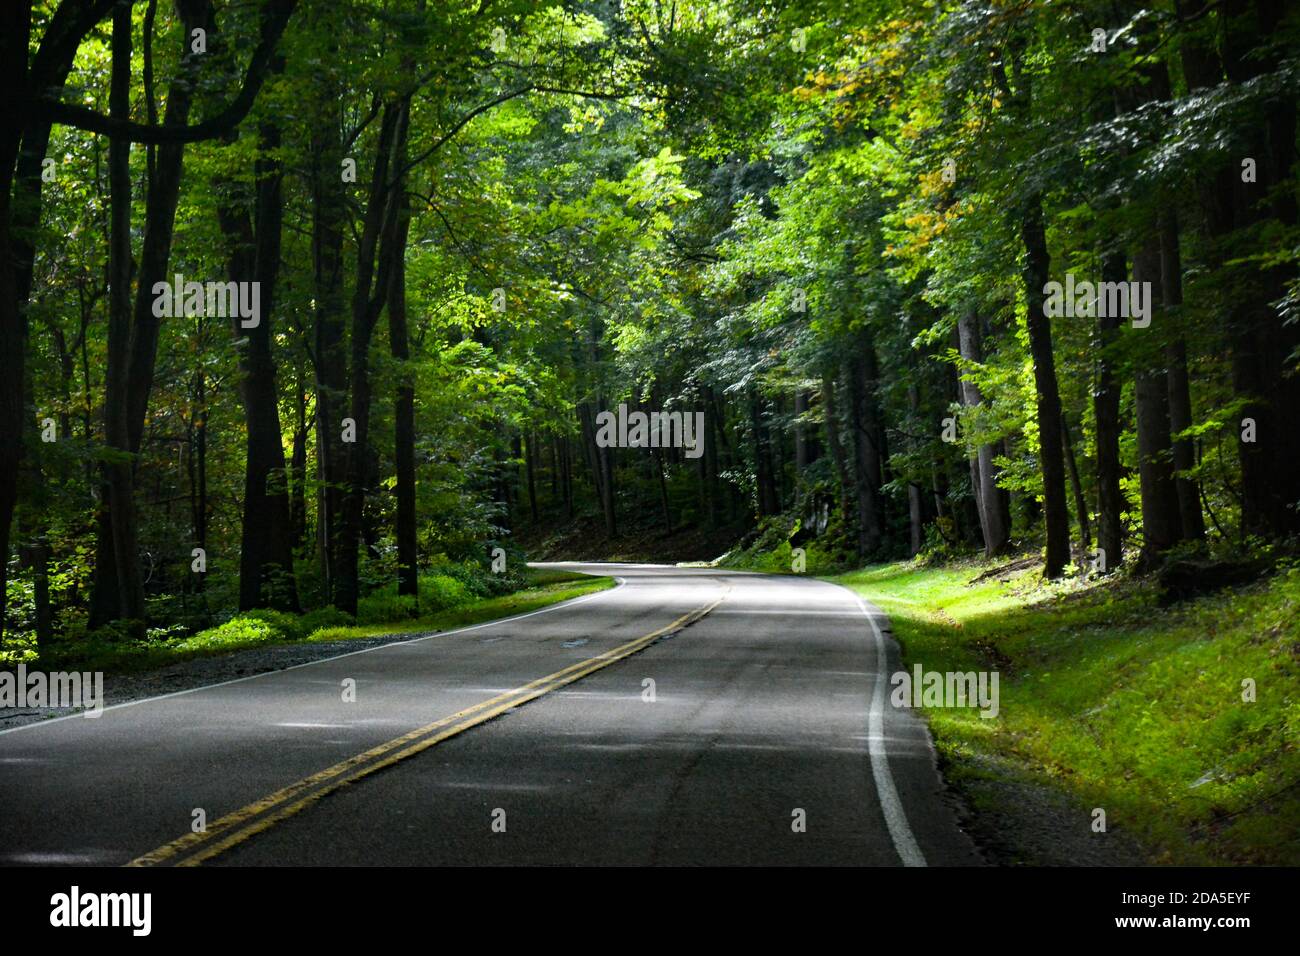 Blacktop in East Tennessee with double yellow line following the curve in the road up ahead in a heavily forested area in the Smoky Mountains Stock Photo